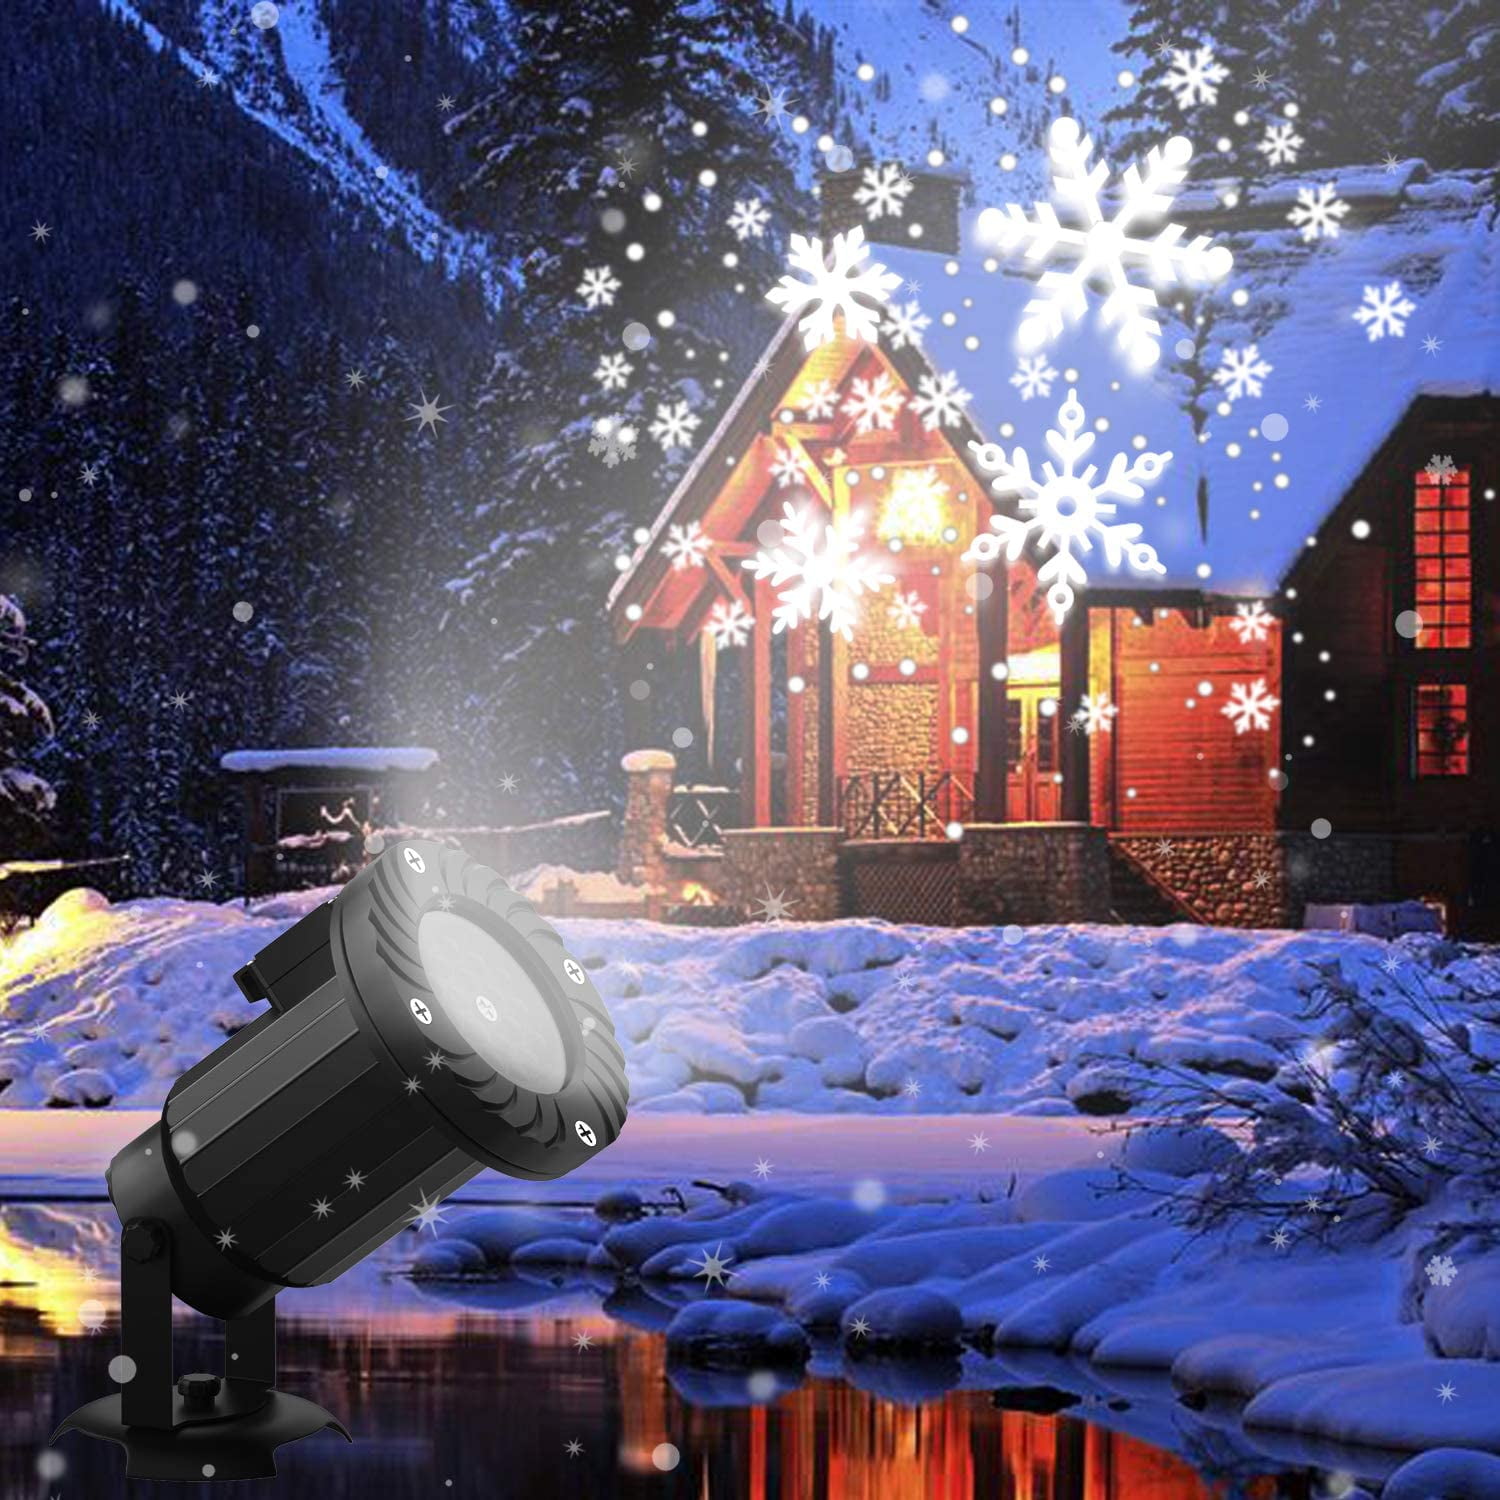 Snowfall Light Projector Wedding Birthday Holiday Outdoor Snowflake Led Lights/Waterproof Landscape Lamp with Wireless Remote for Christmas Garden Party